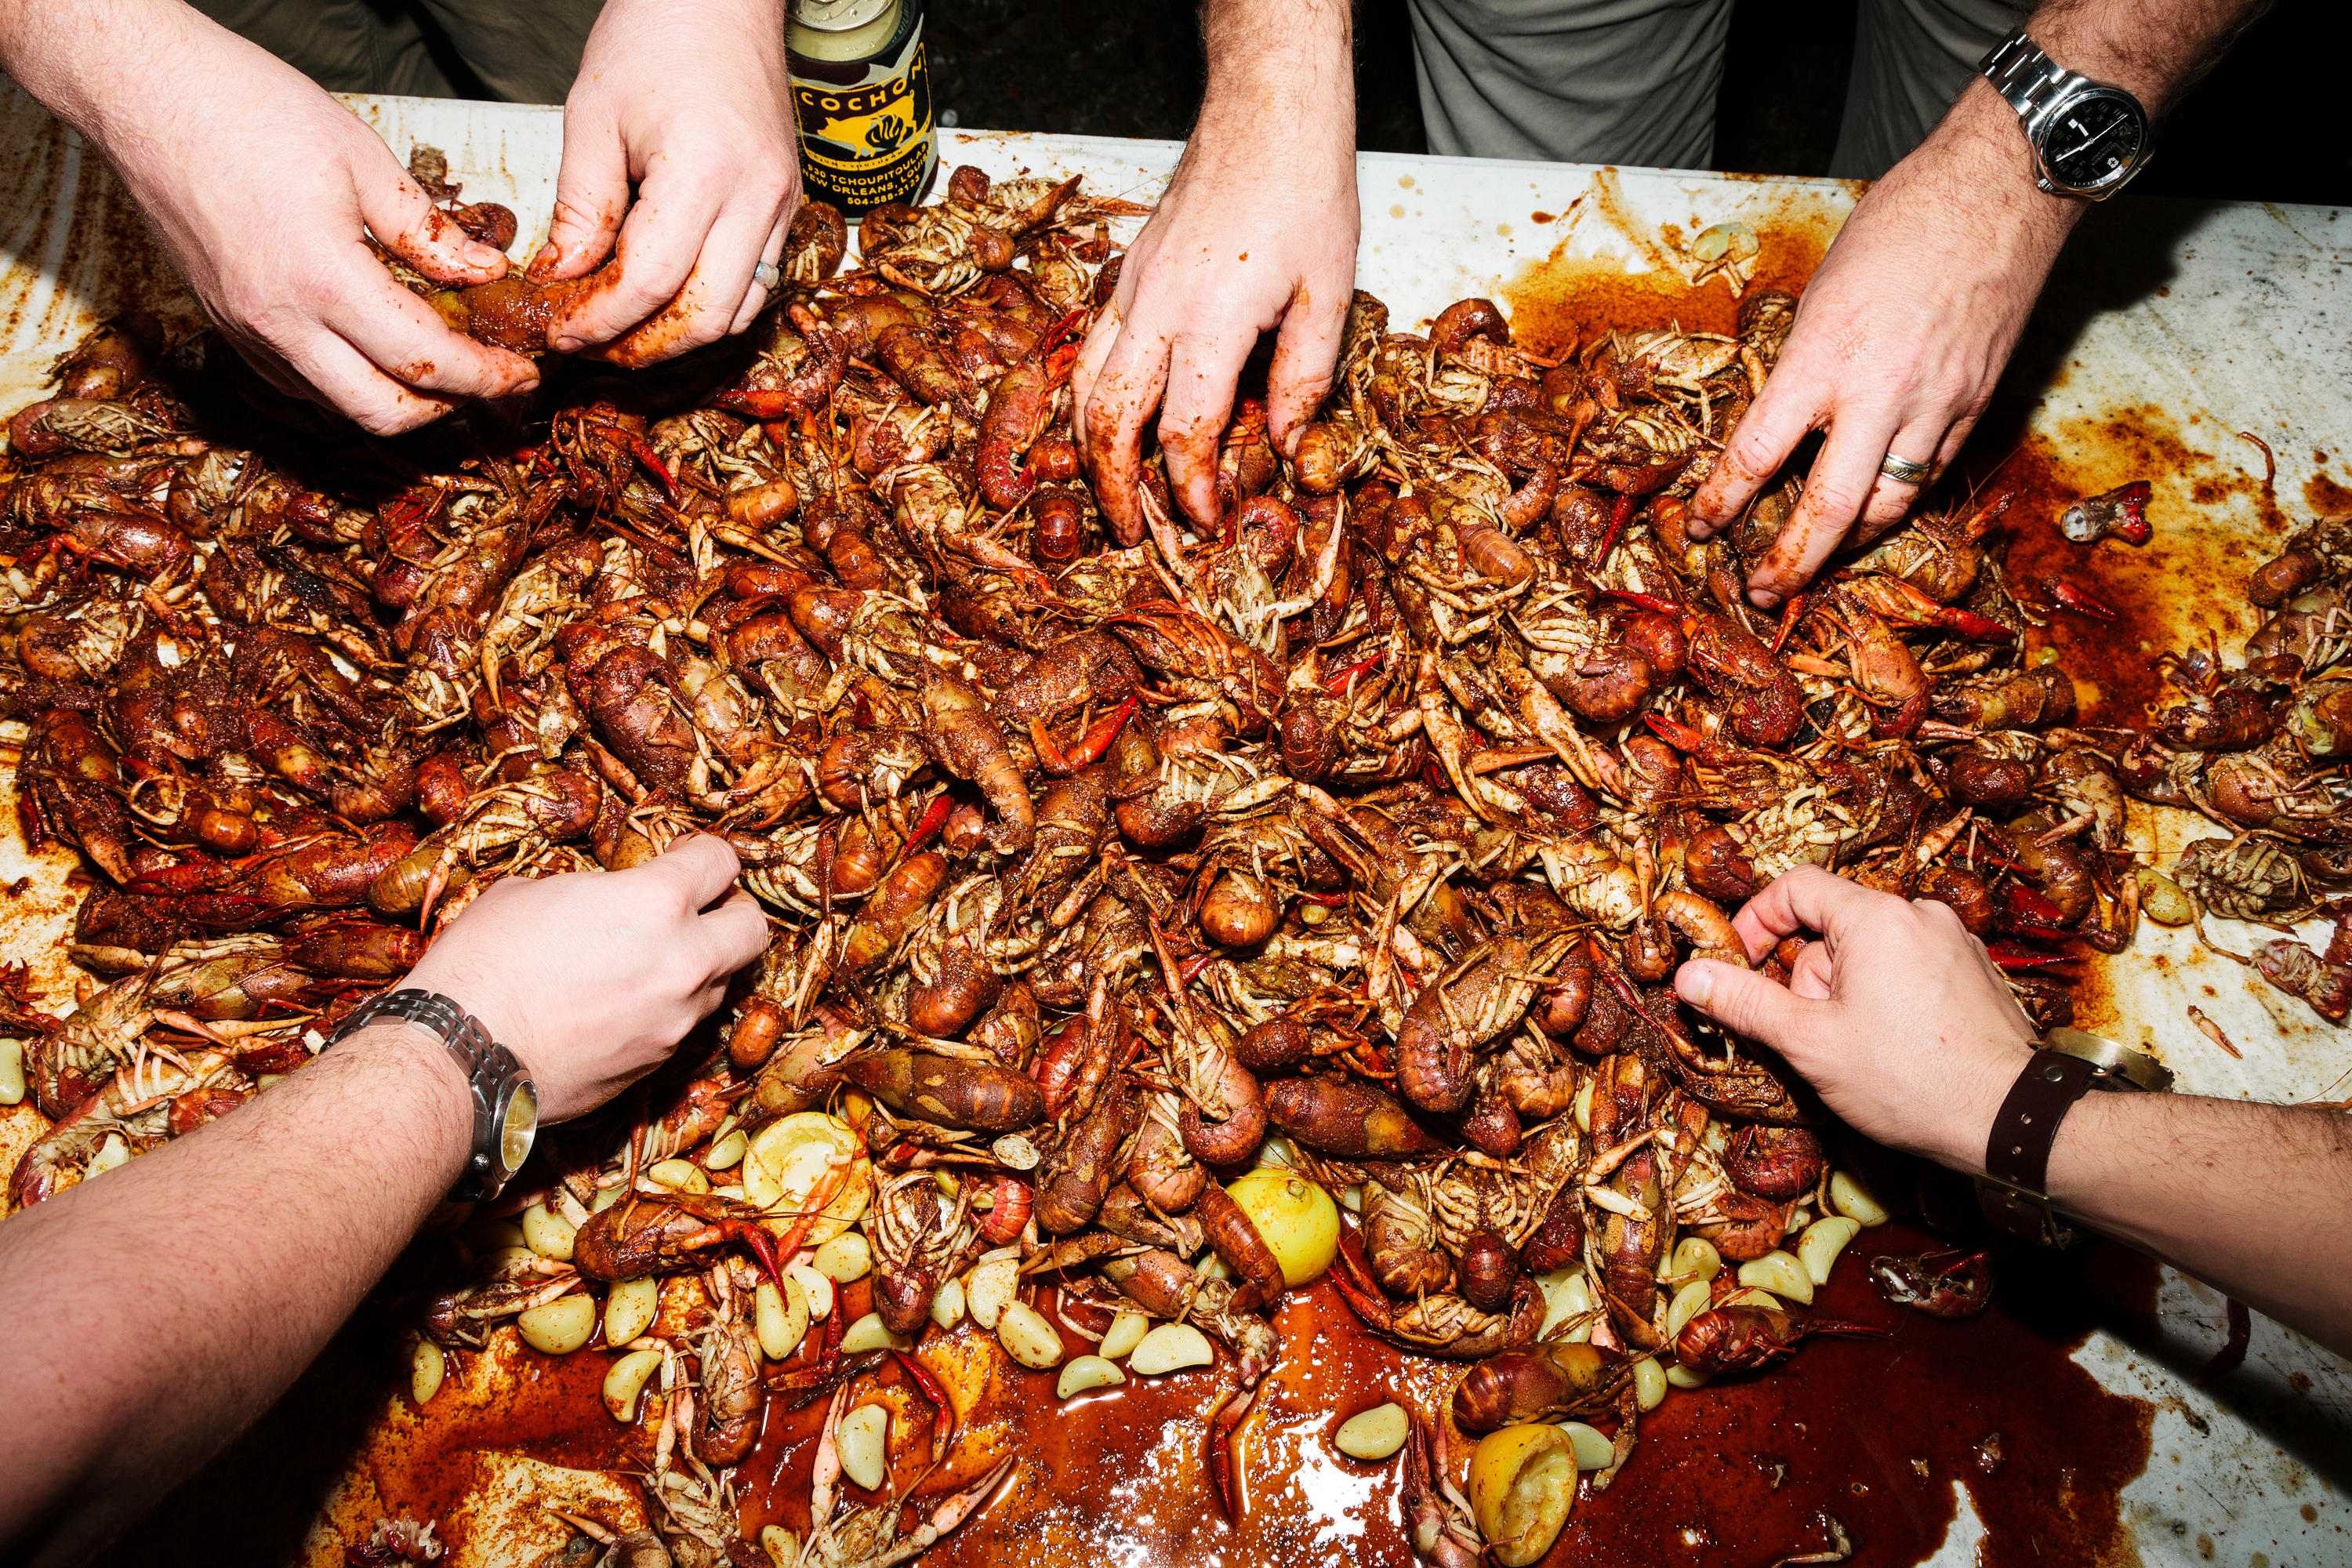 Crawfish boil on the banks of the Mississippi in New Orleans with chefs Donald Link and Stephen Stryjewski of Cochon restaurant. The crawfish are cooked with lemons, garlic, and salt, then tossed with Old Bay and Cajun spices before being dumped on a plastic table for eating.